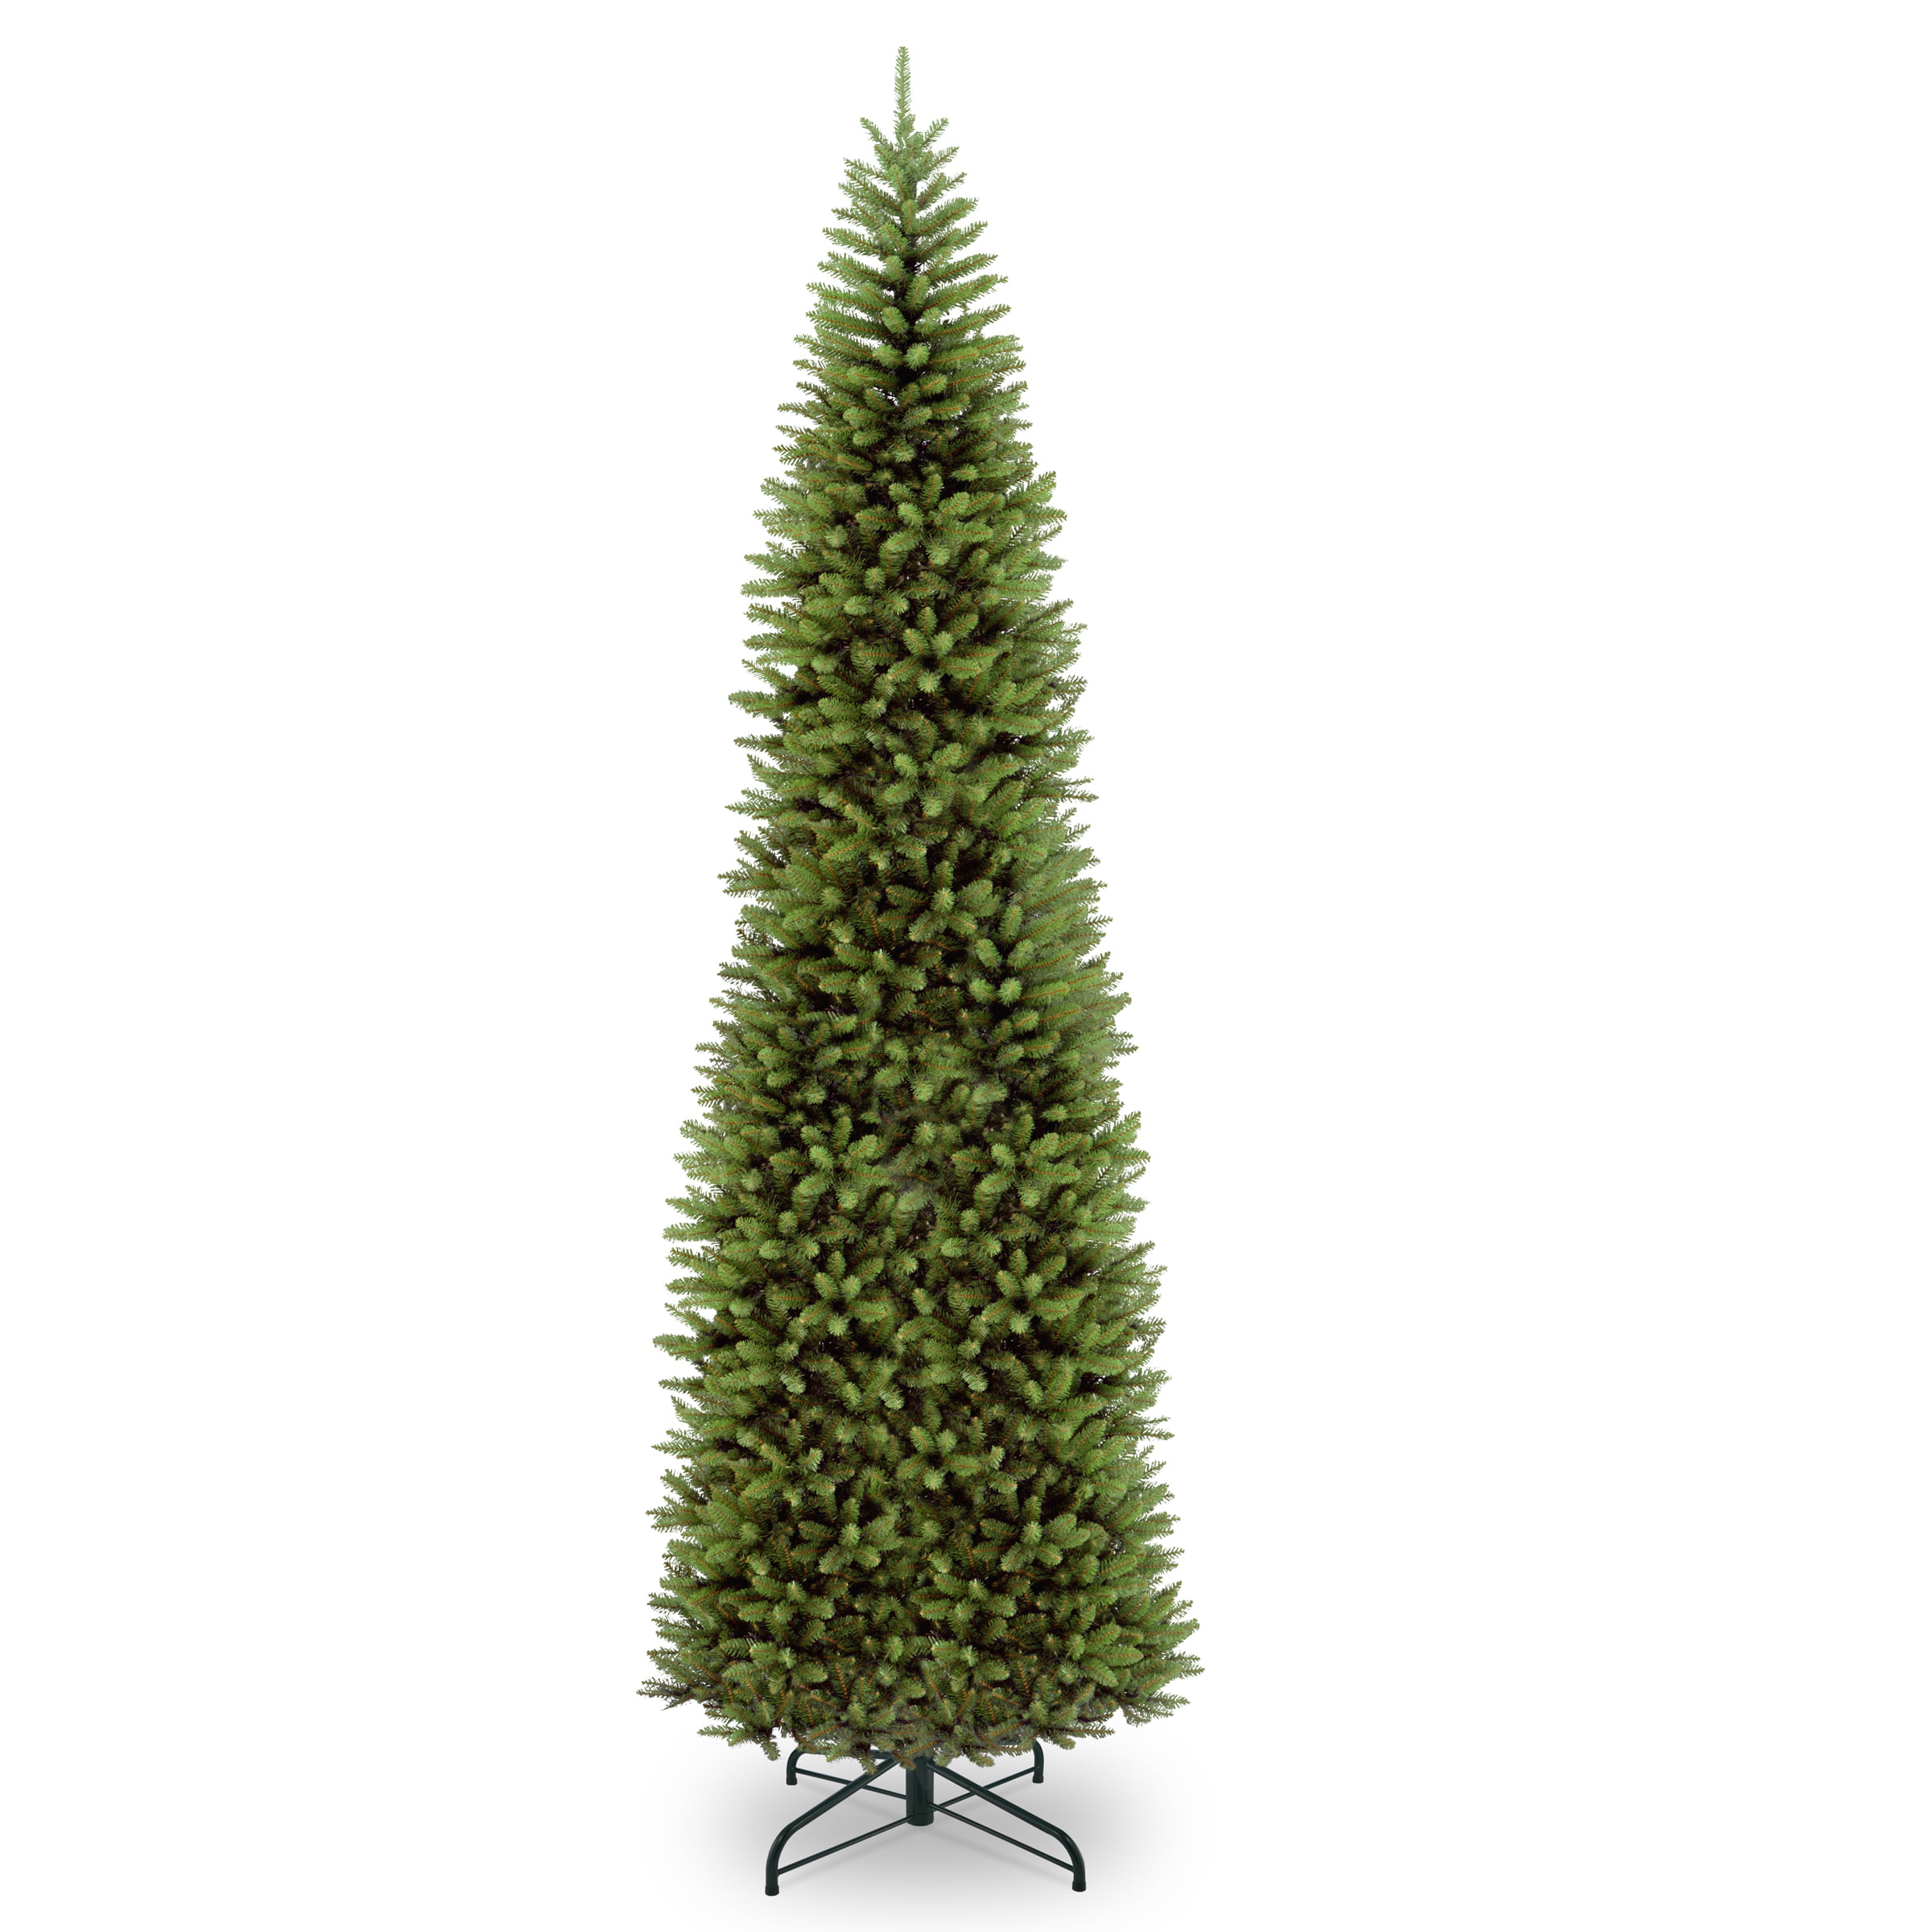 KW7-300-30 National Tree 3 Foot Kingswood Fir Wrapped Pencil Tree with 50 Clear Lights